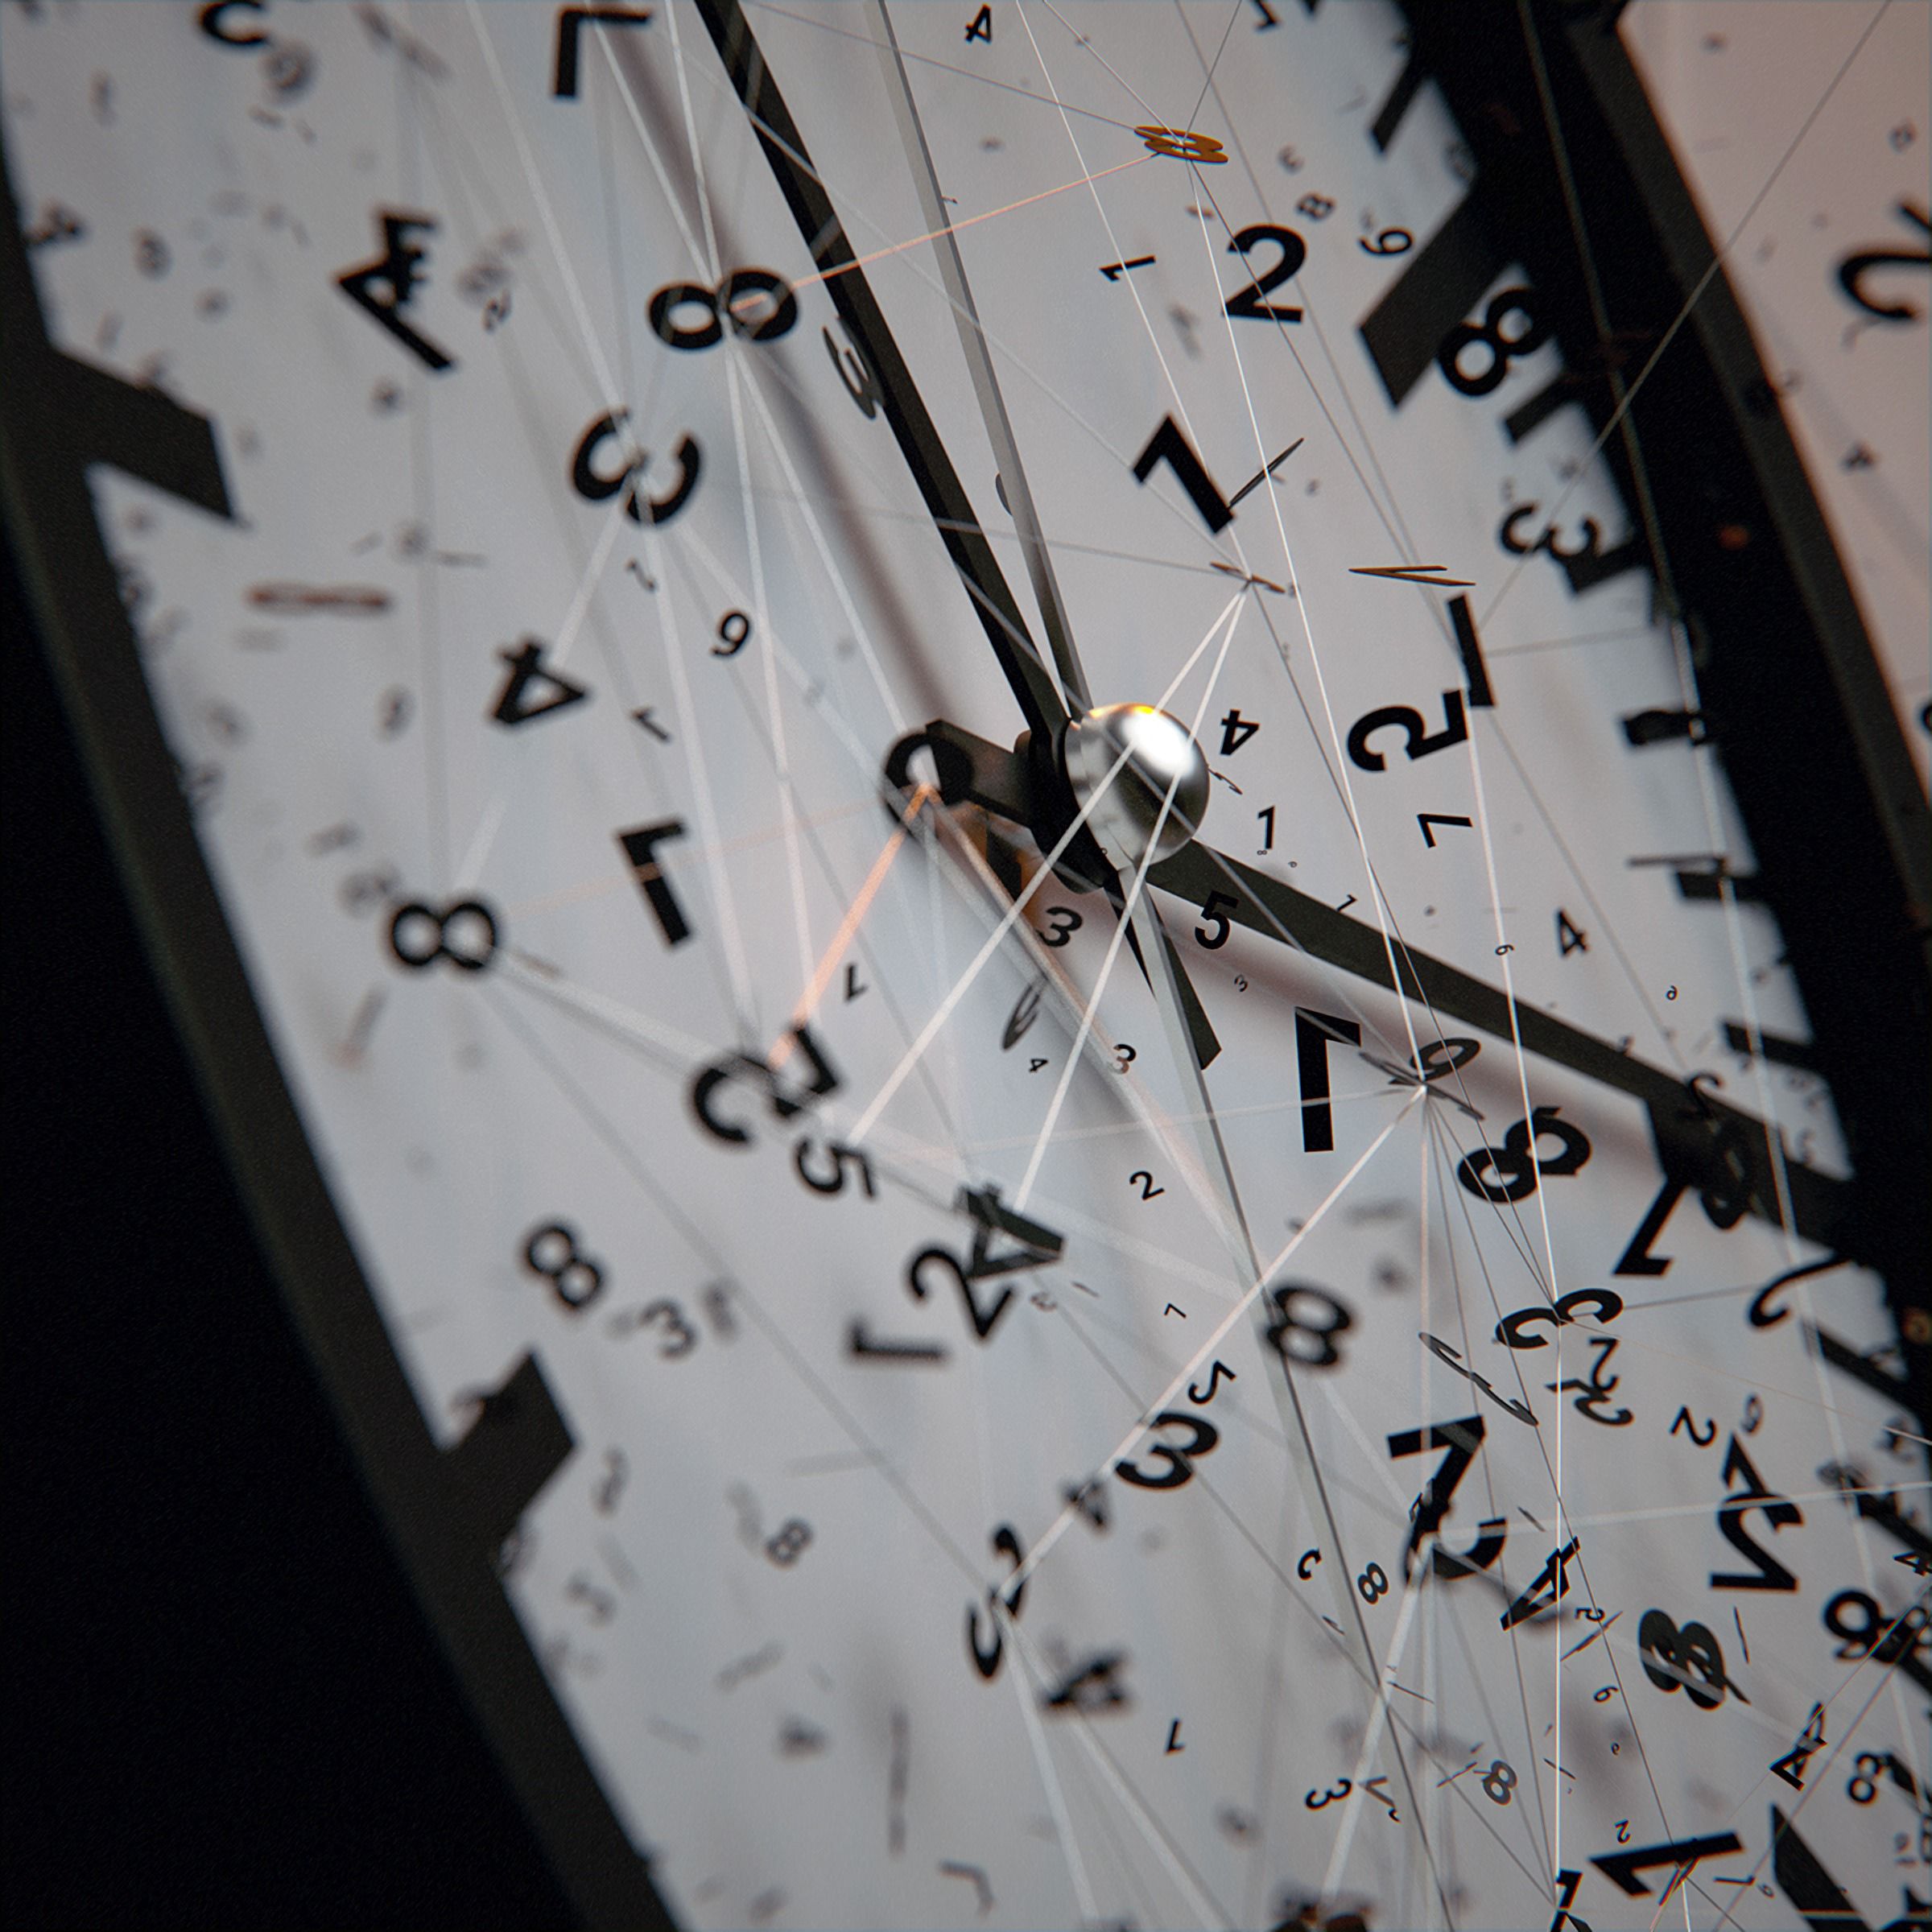 miscellanea, numbers, clock face, clock, dial, intricate, miscellaneous, lines, confused, arrows